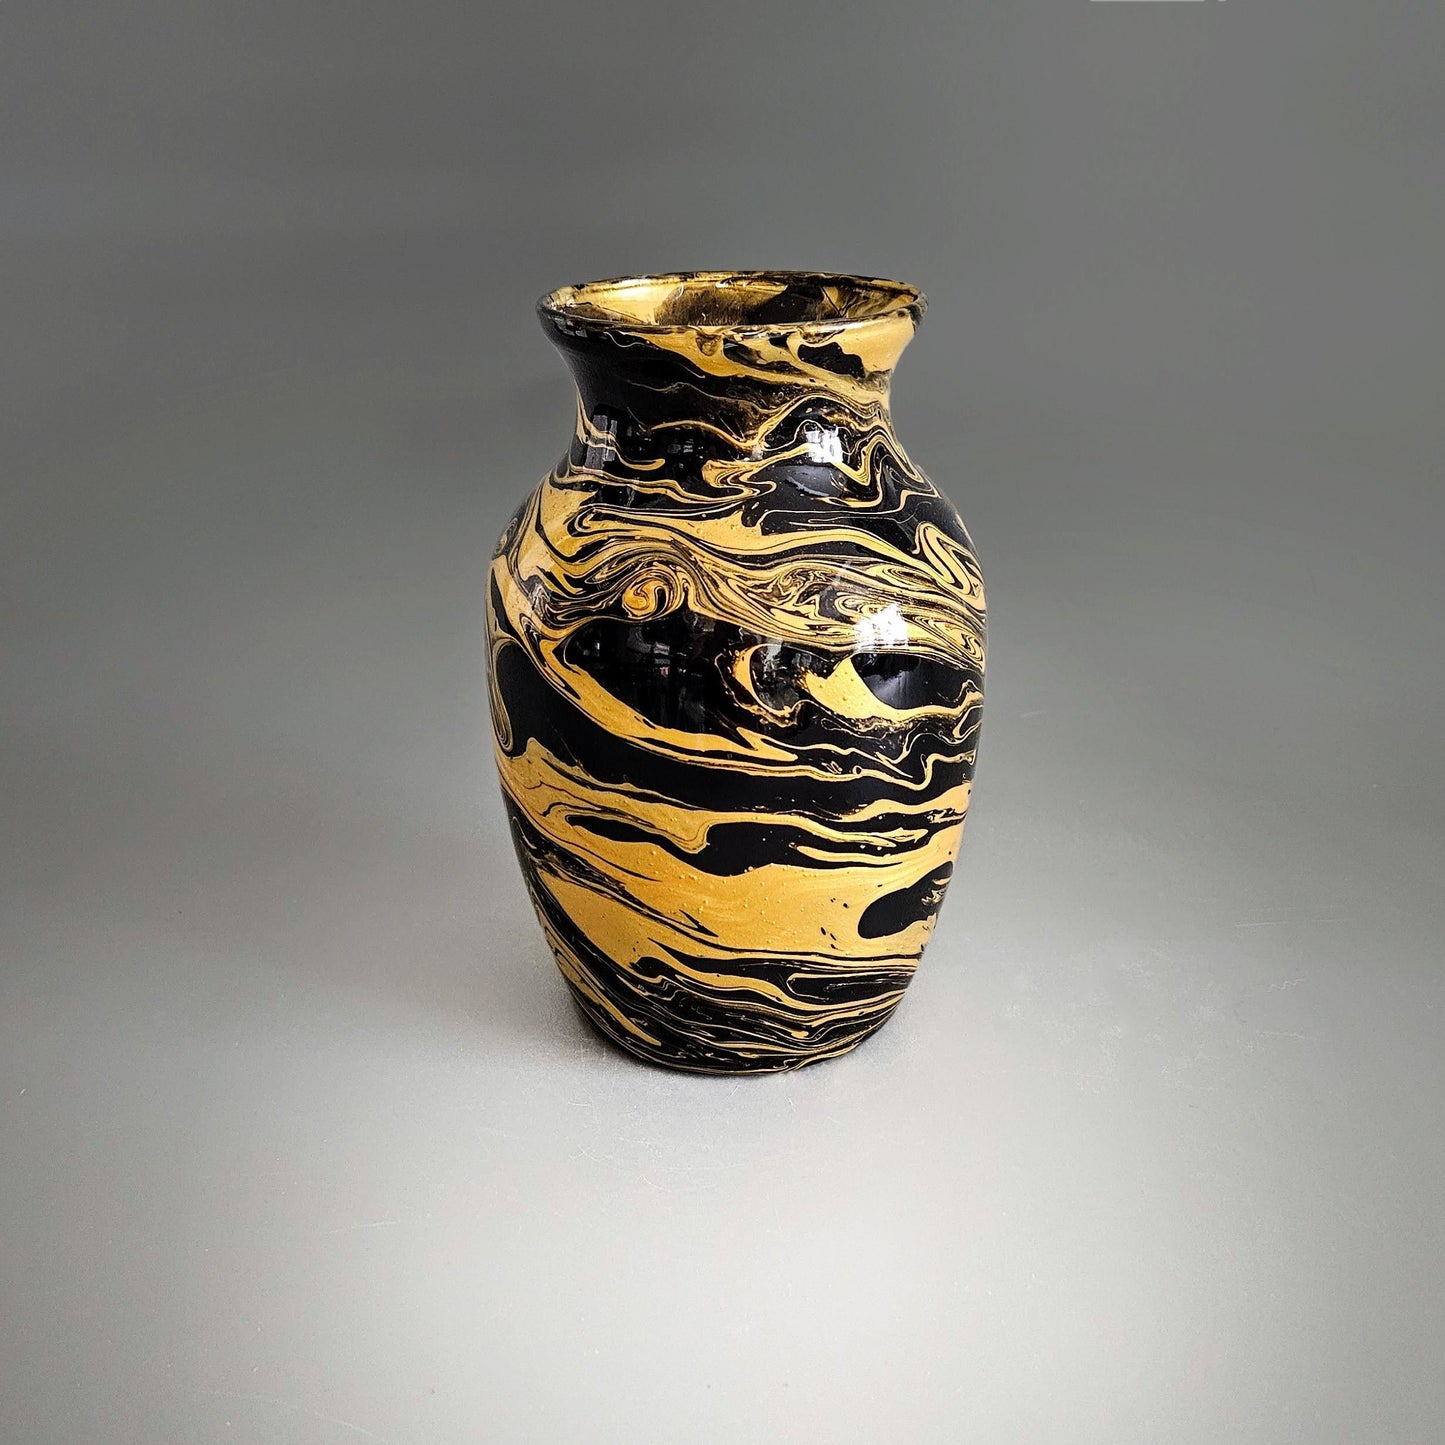 Abstract Glass Art Vase in Black and Gold